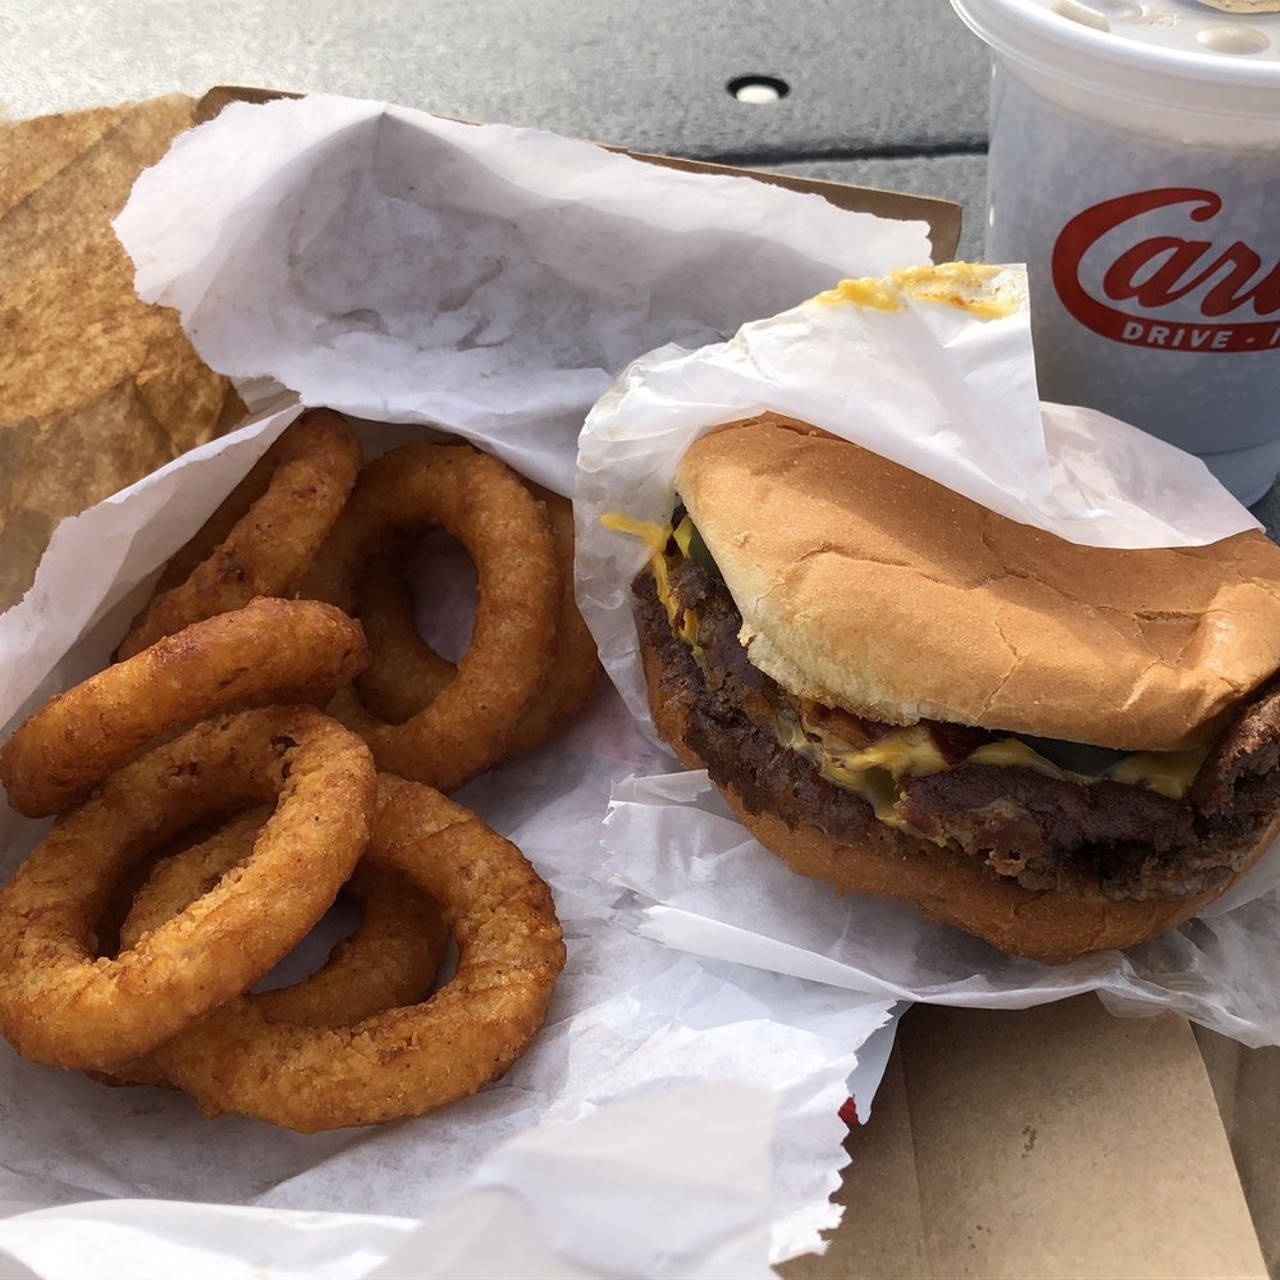 #34: Carl's Drive In
(9033 Manchester Road, Brentwood; 314-961-9652)
Read Yelp&#146;s reviews here.
Photo credit: Jason P. via Yelp